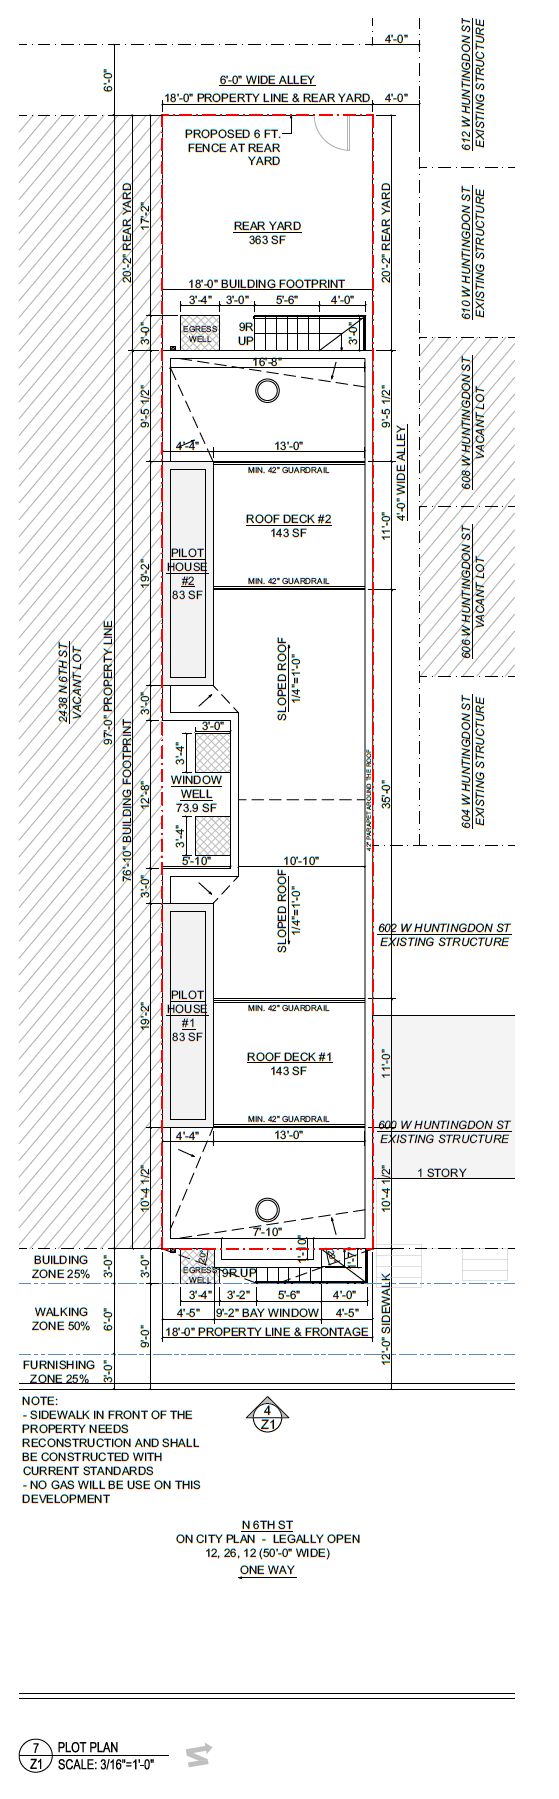 2540 North 6th Street. Site plan. Credit: JT Ran Expediting via the City of Philadelphia Department of Planning and Development